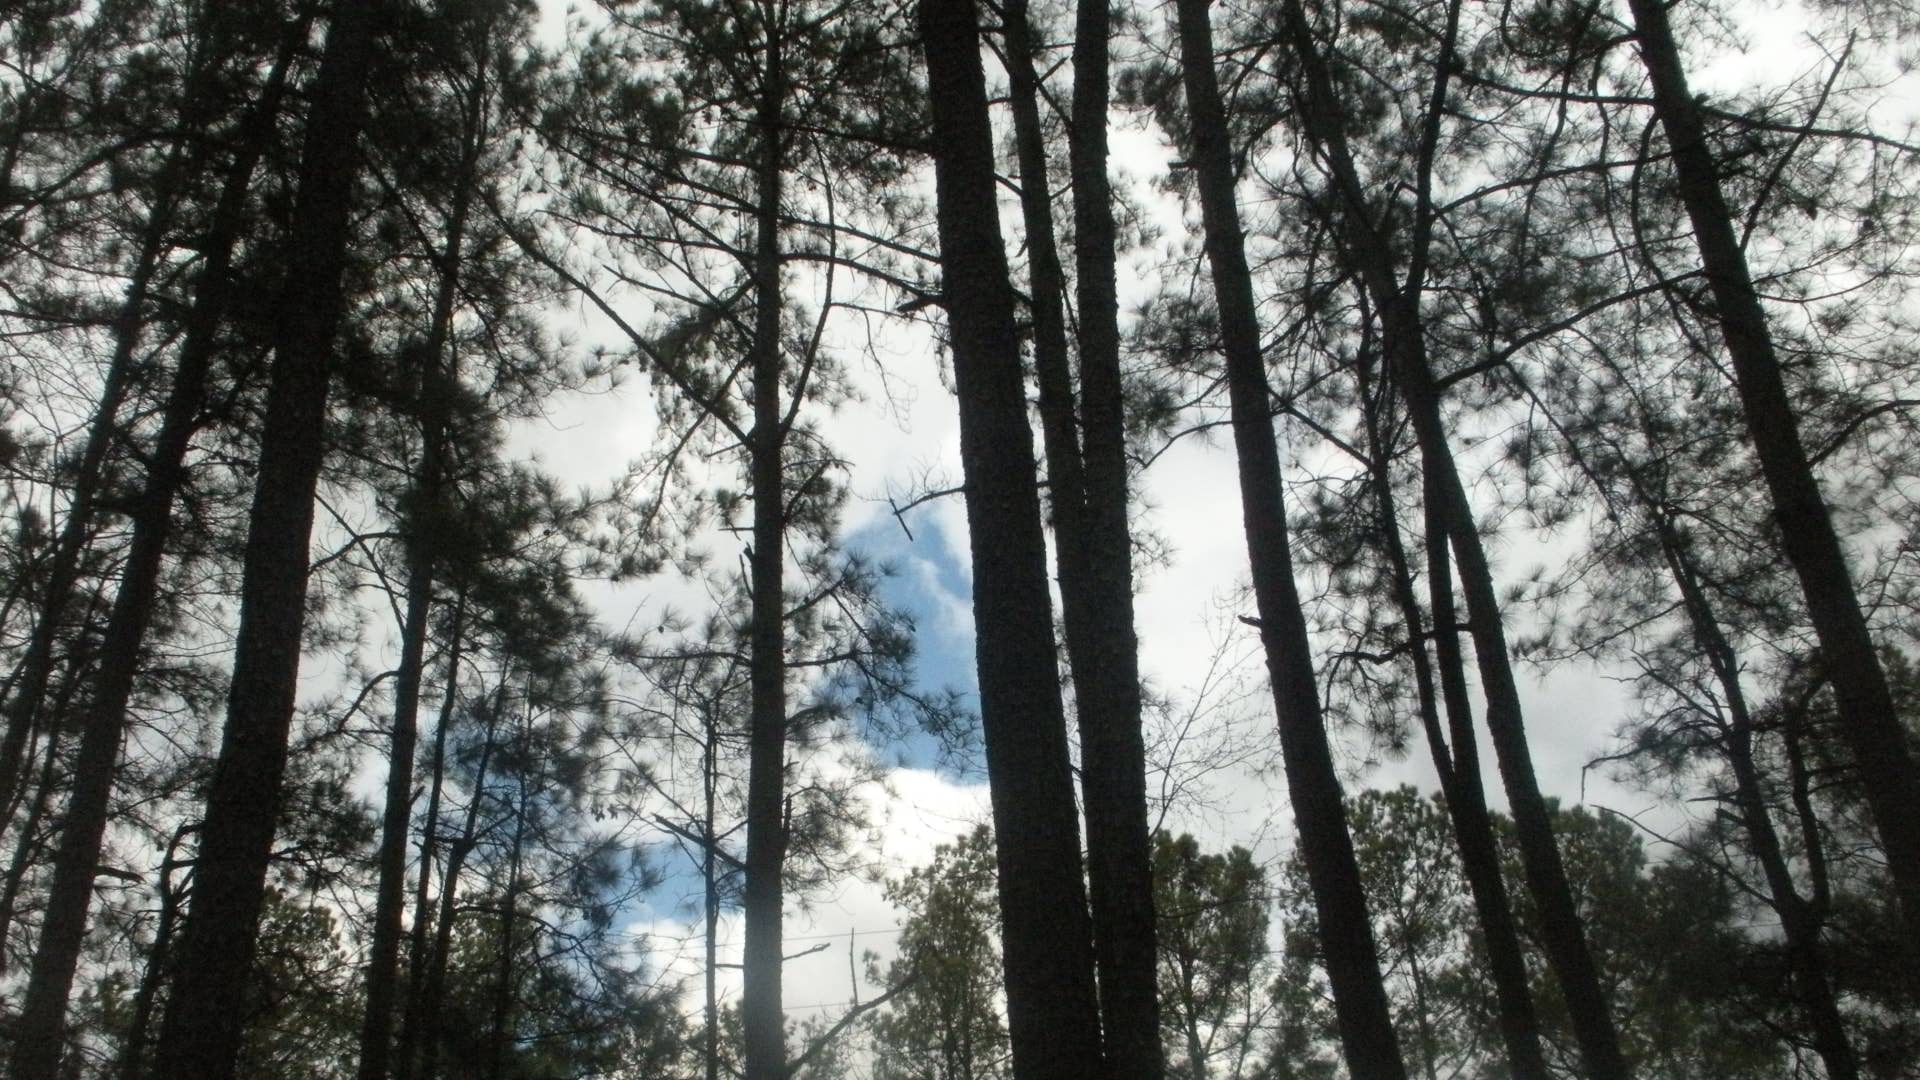 Many tall trees with clouds and blue sky in the background